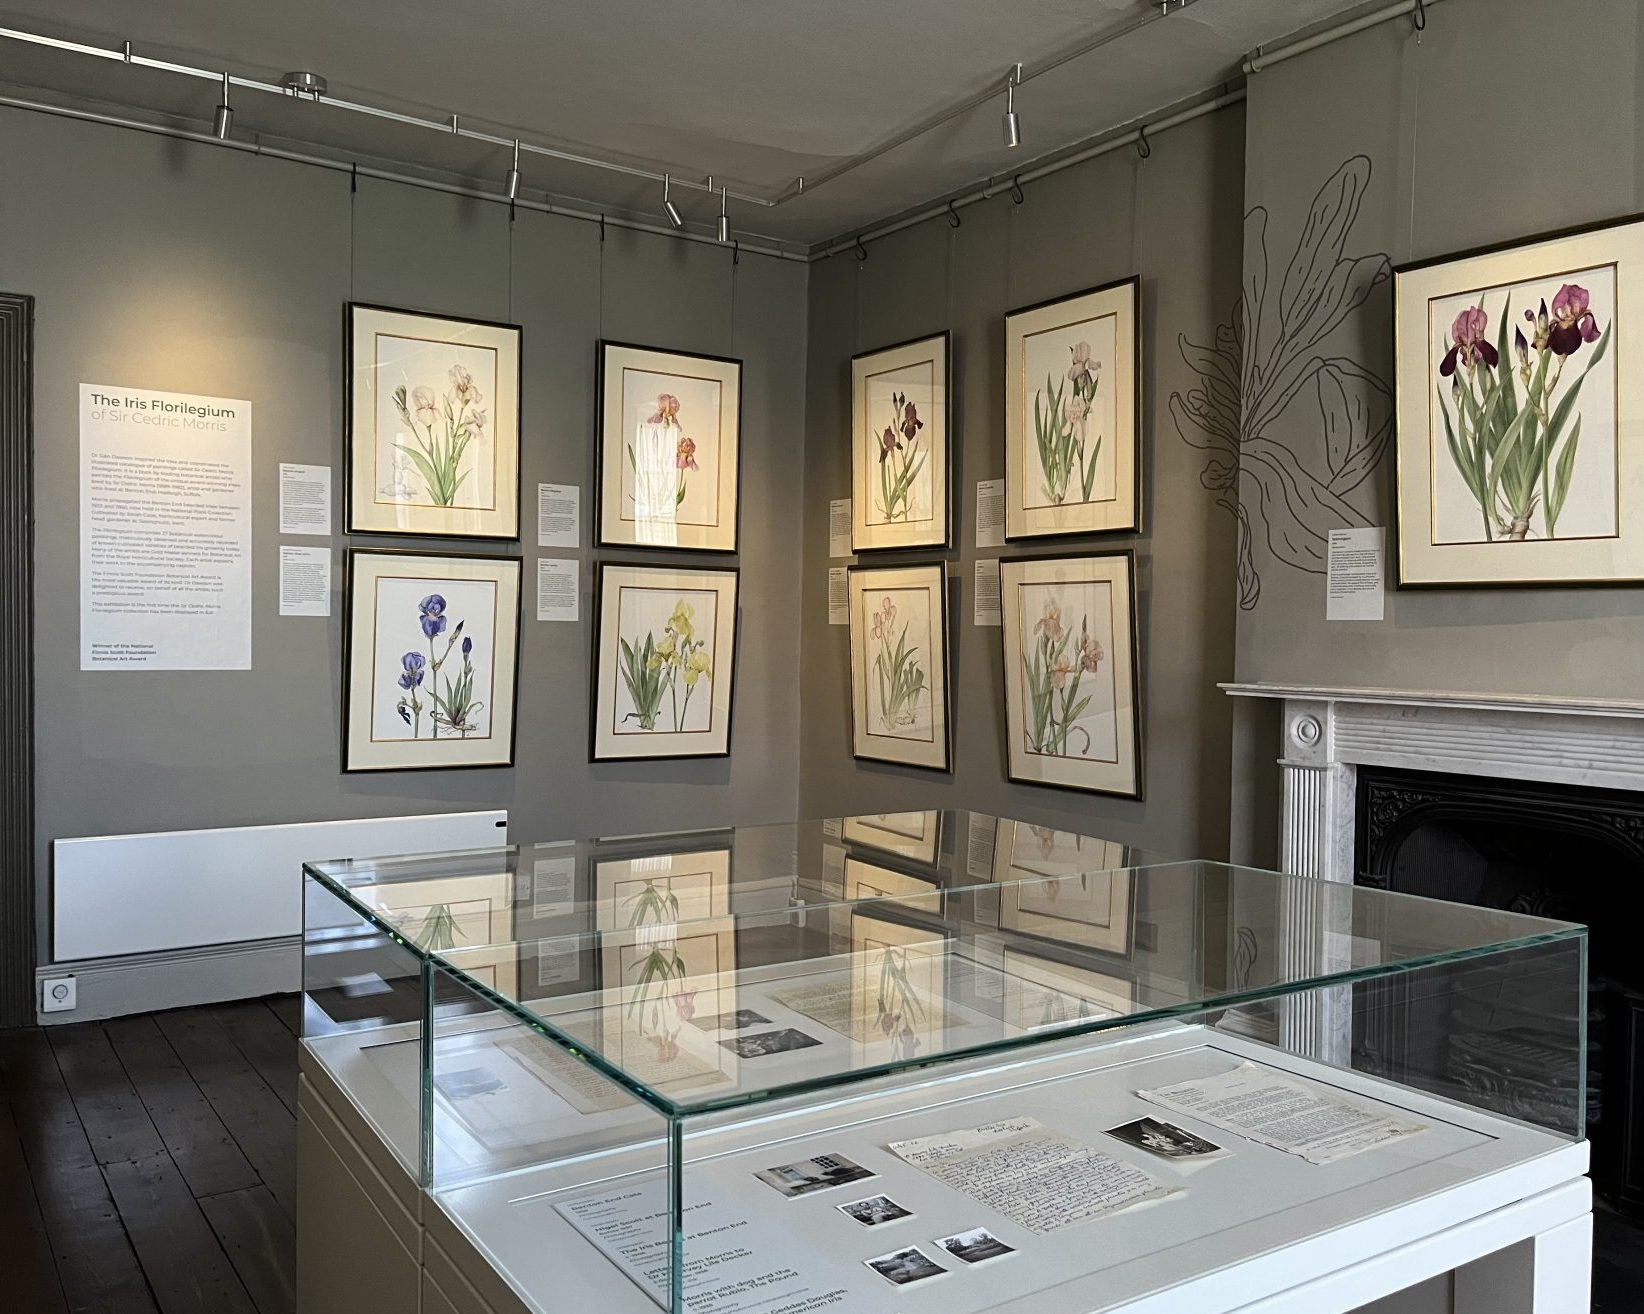 An image of The Iris Florilegium of Sir Cedric Morris in the David Pike Drawings Gallery at Gainsborough's House. There are various botanical art illustrations in frames on the wall.